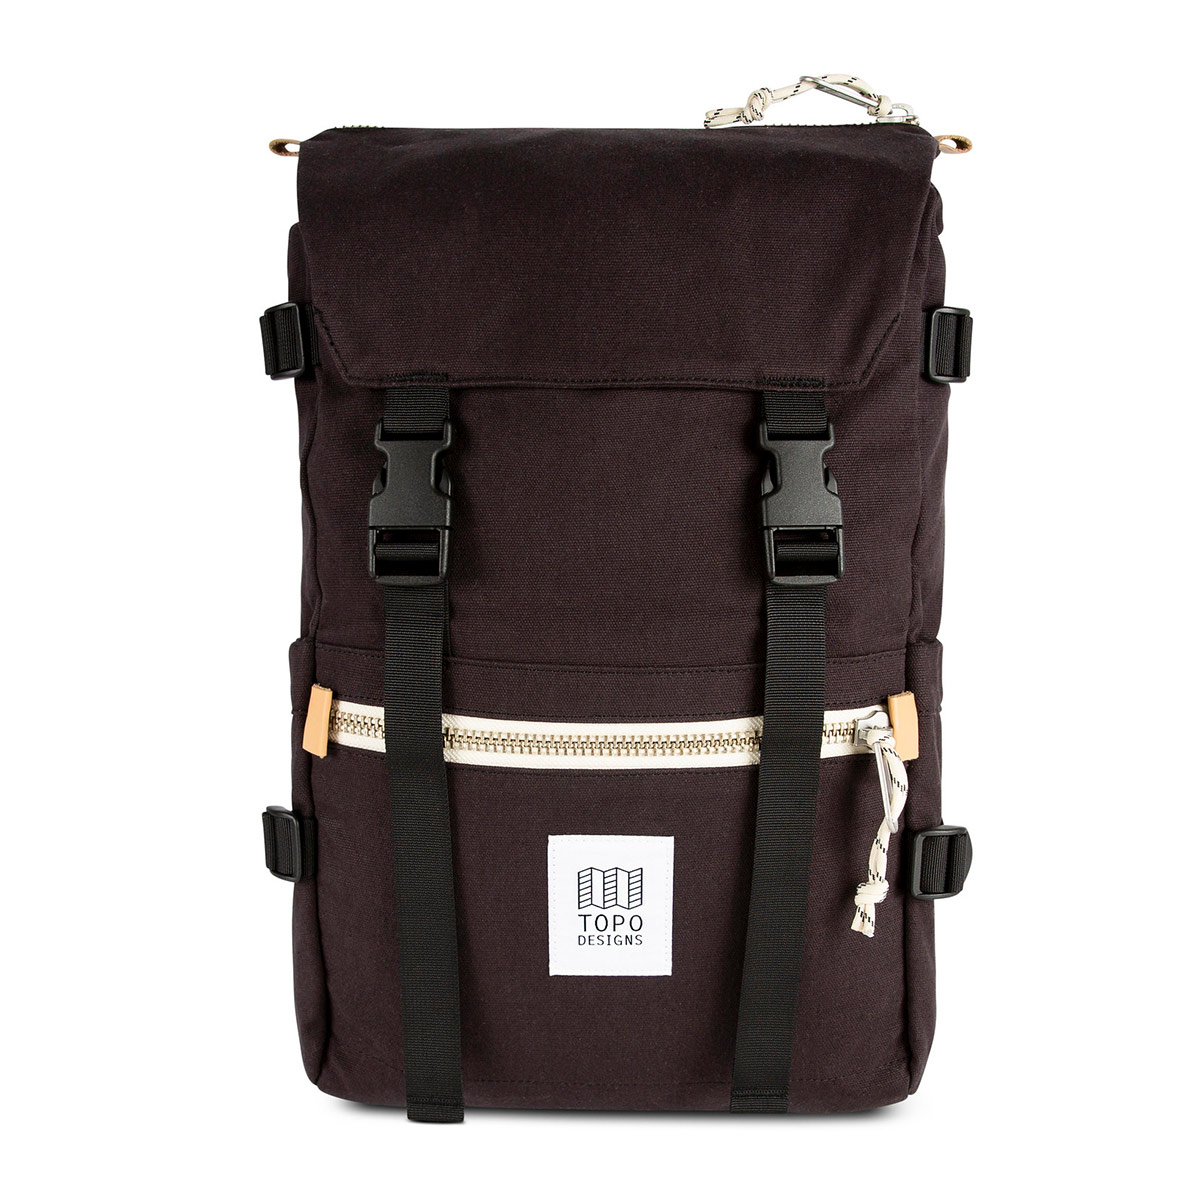 Topo Designs Rover Pack Canvas Black, Mountain-inspired durability meets city-ready styling in the Rover Pack Canvas.